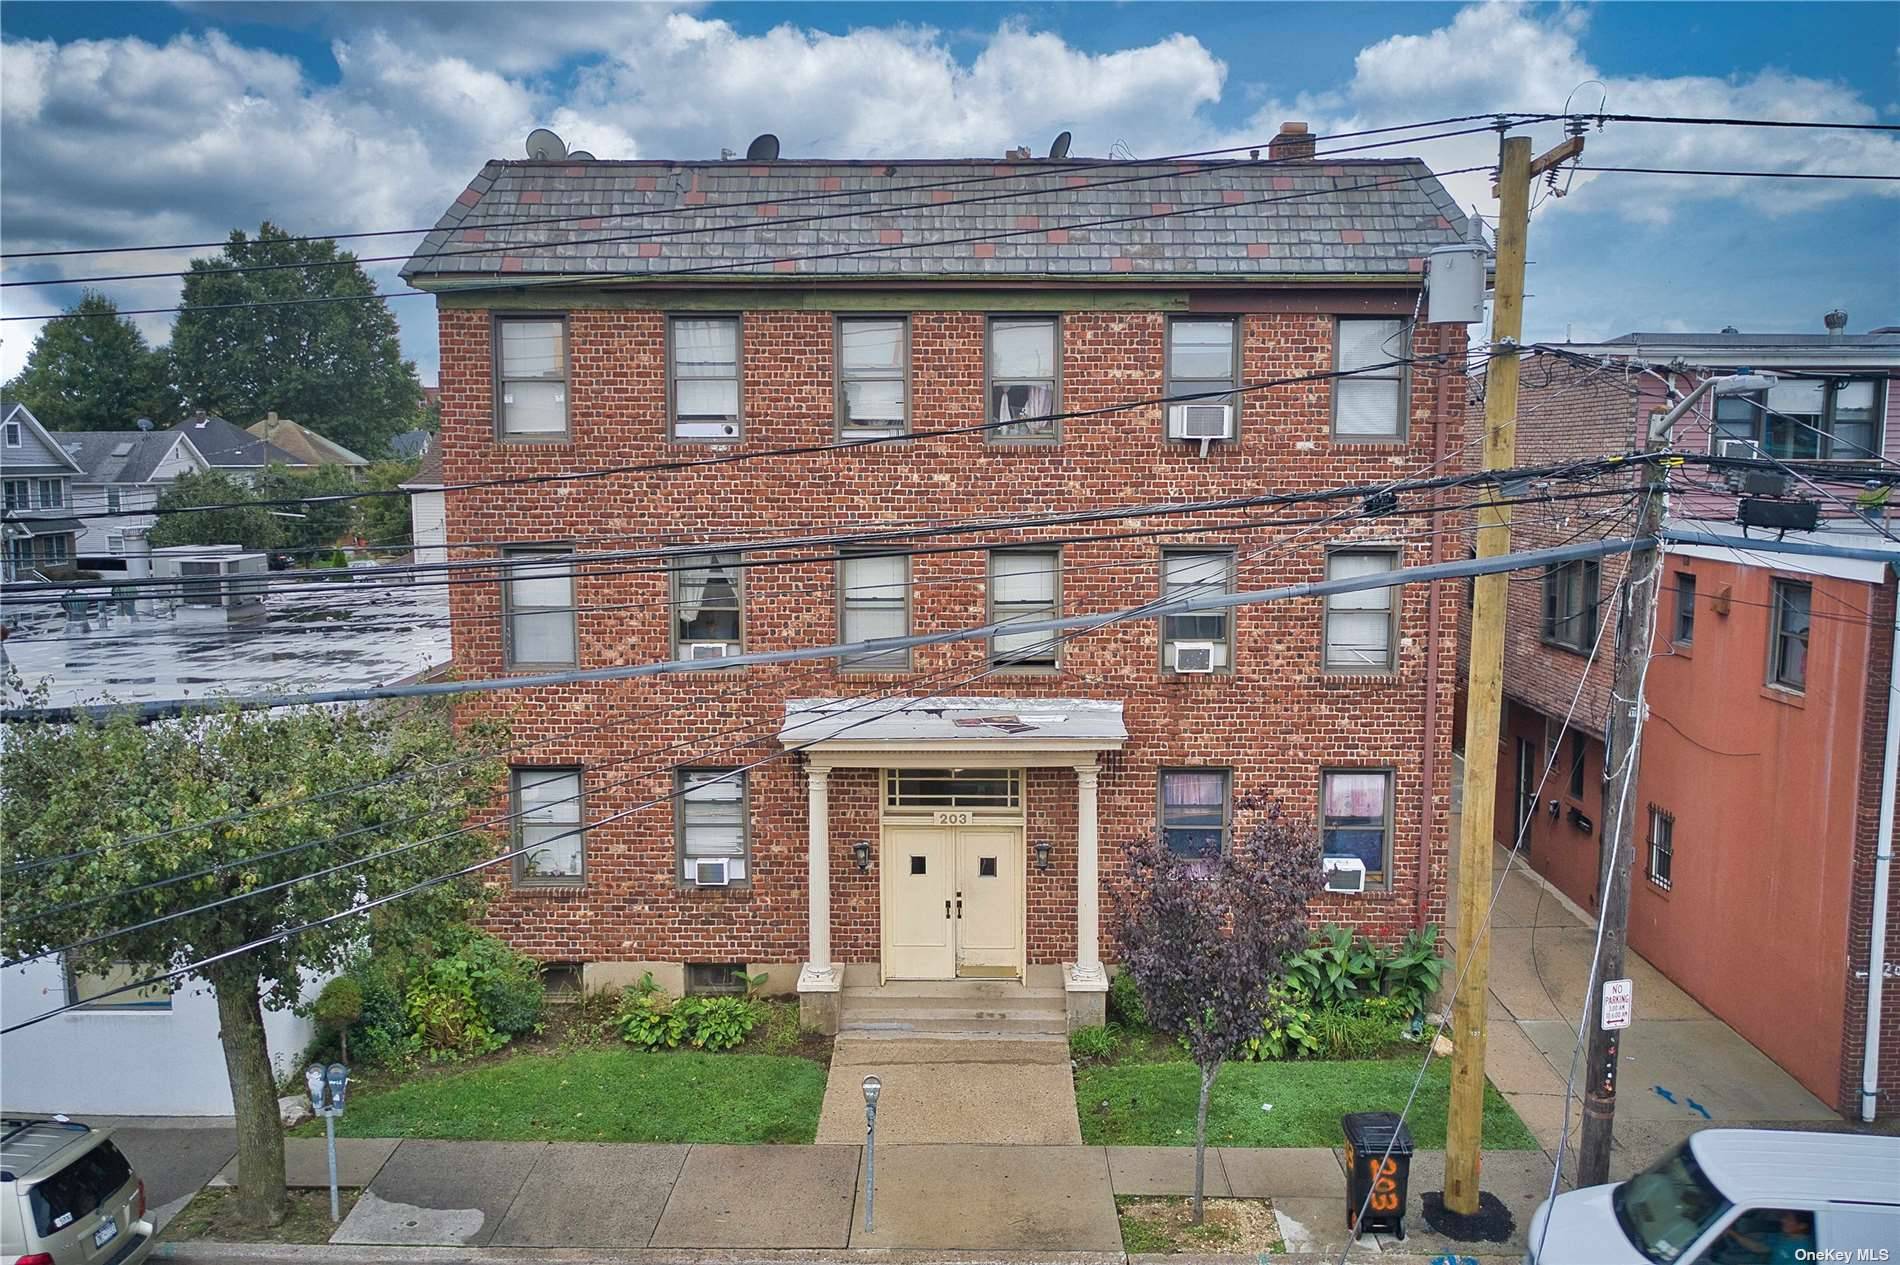 Expand your portfolio with this 15 unit multifamily apartment building, located on Willis Avenue in the heart of Mineola.